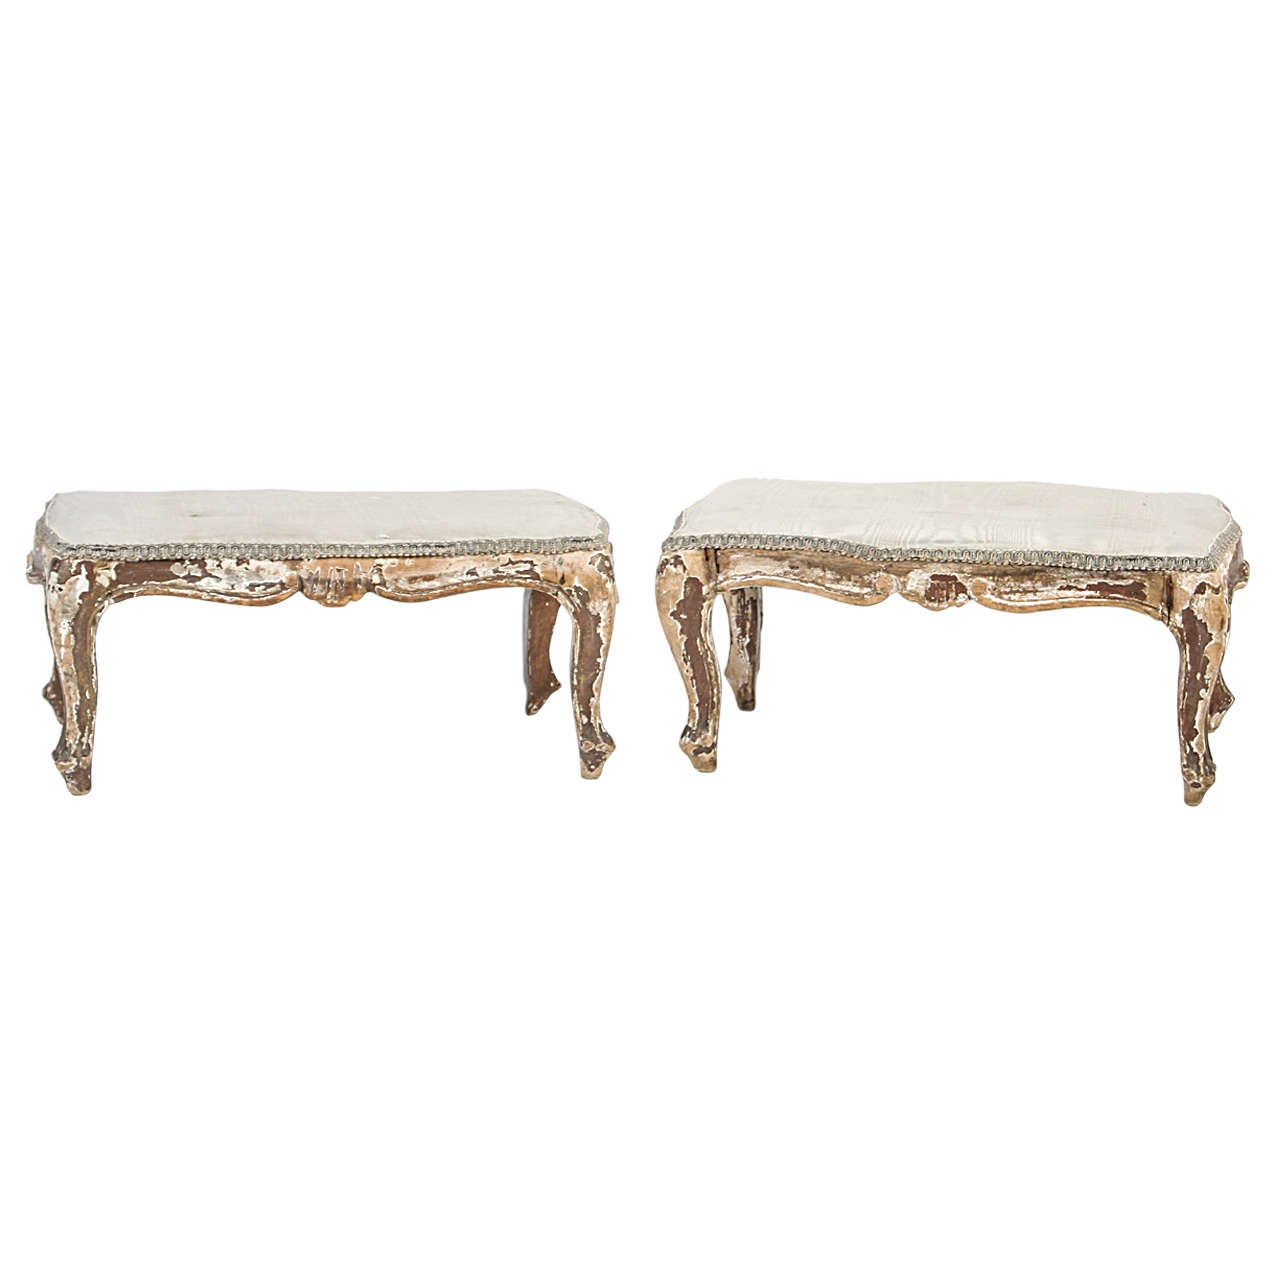 17th-18th Century Venetian Stools Formerly Owned by Pamela Harriman